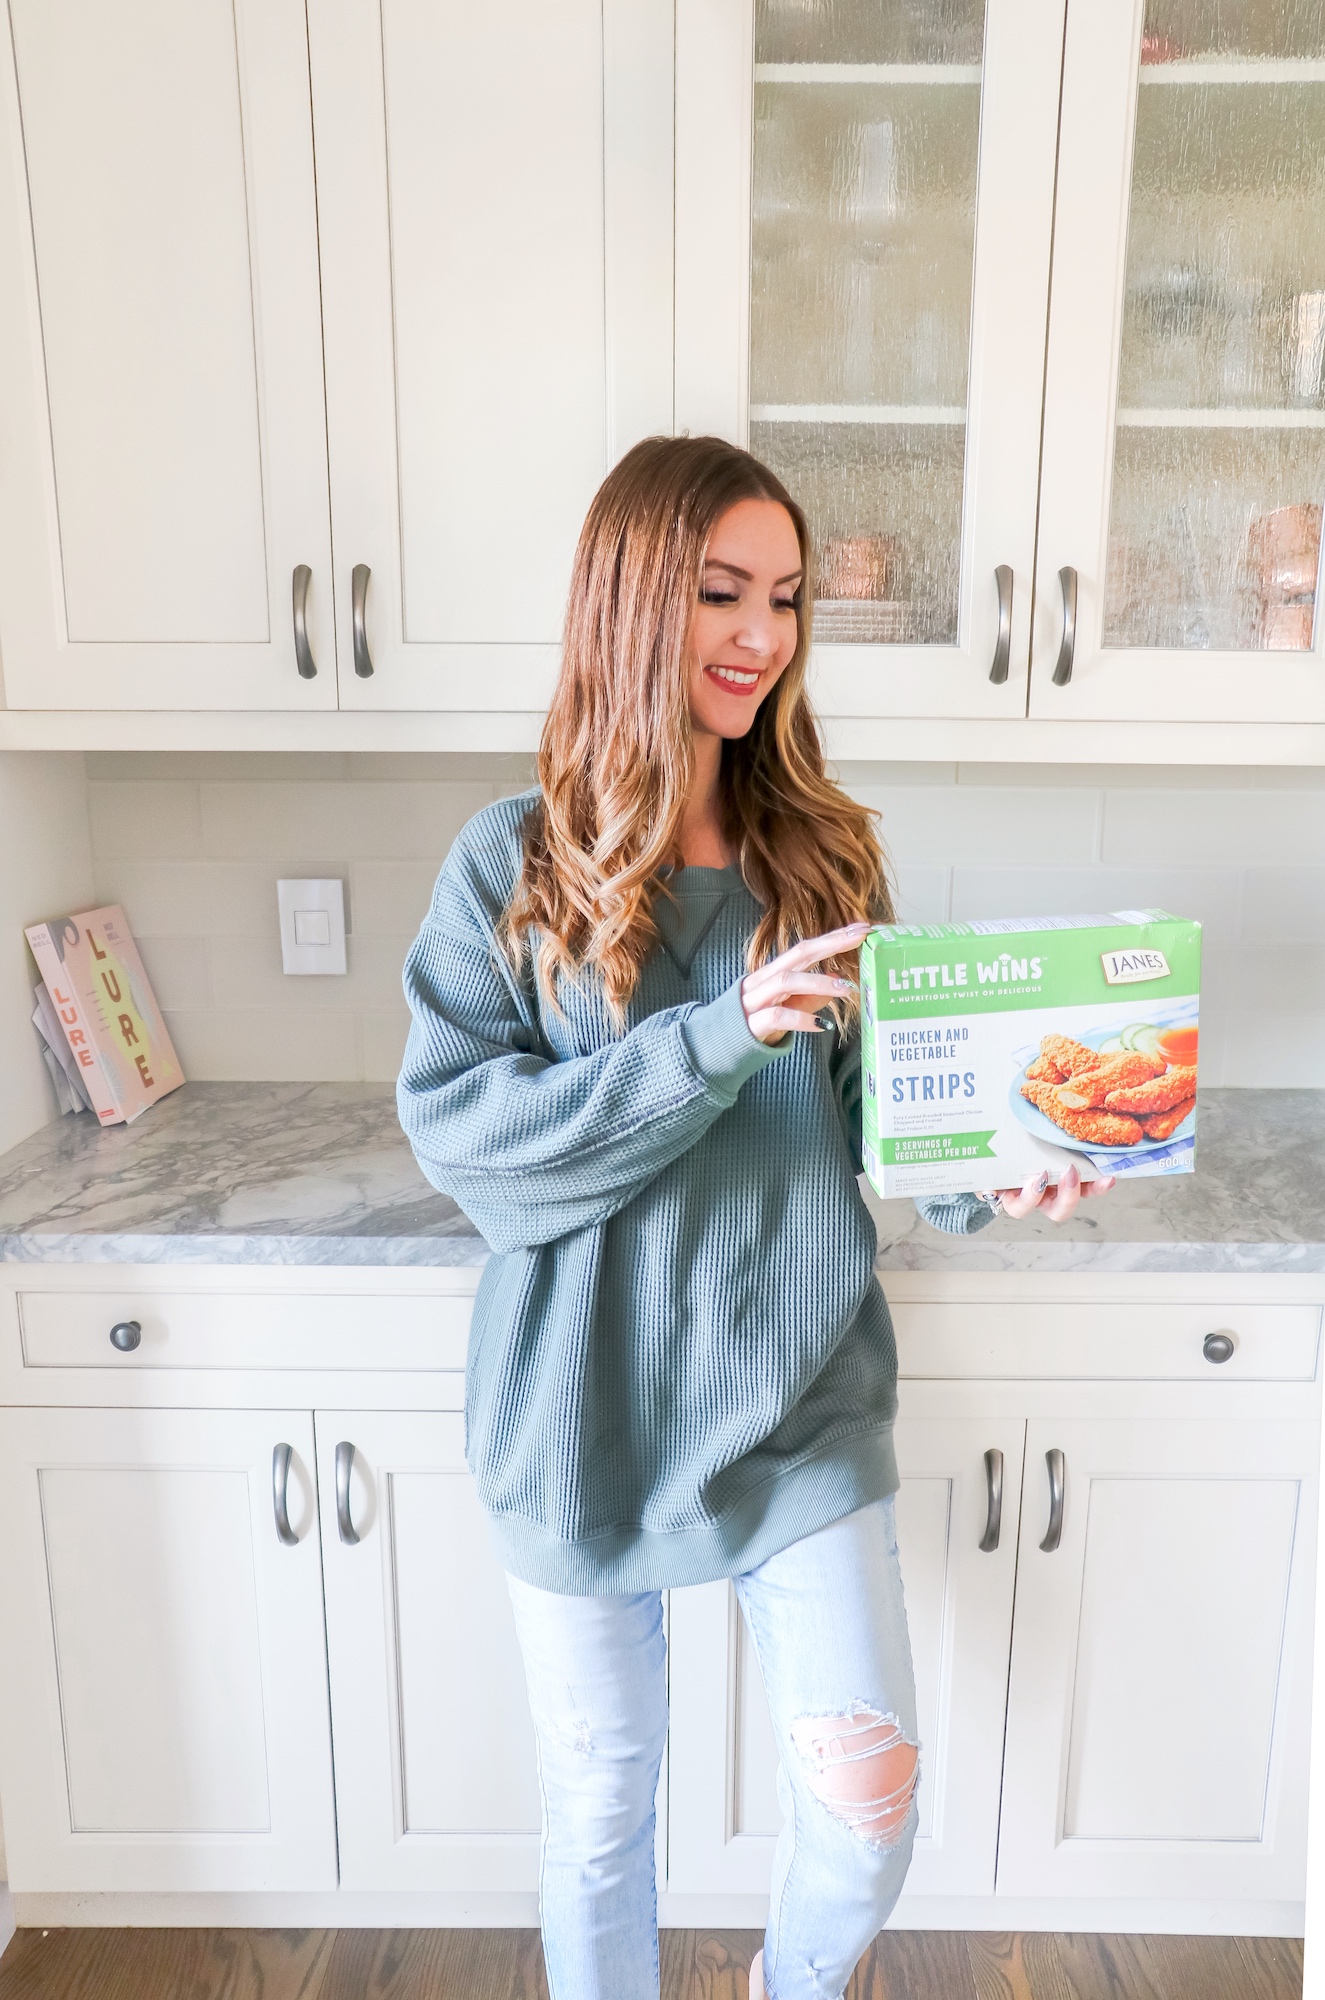 Blogger Holly Hunka with Little Wins chicken